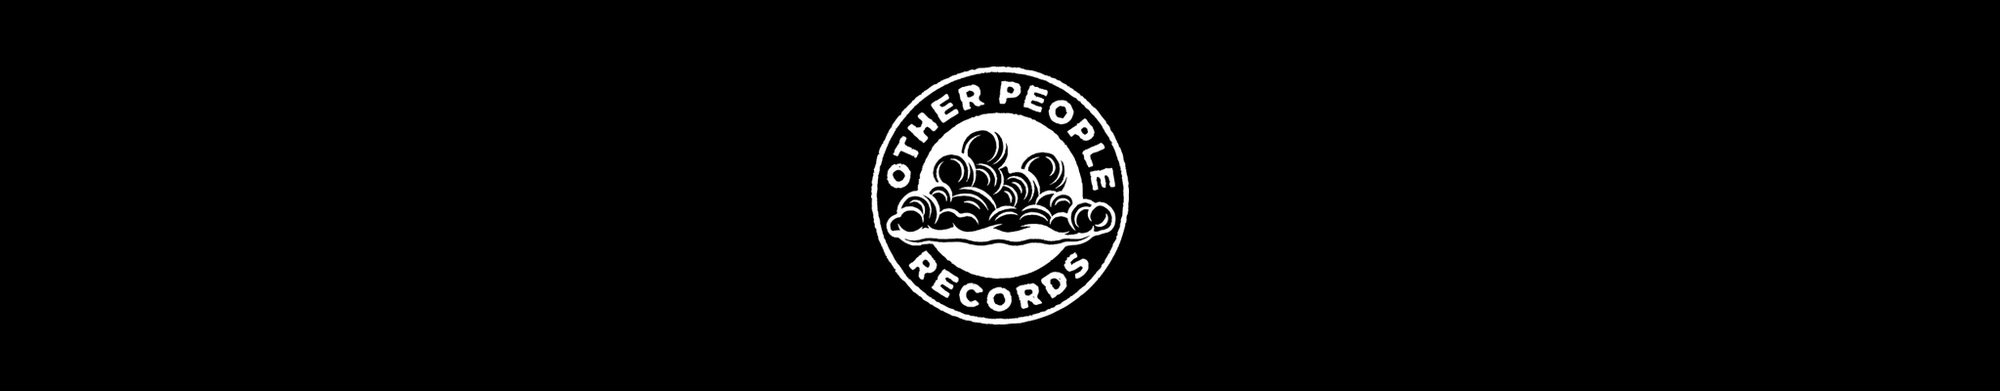 OTHER PEOPLE RECORDS